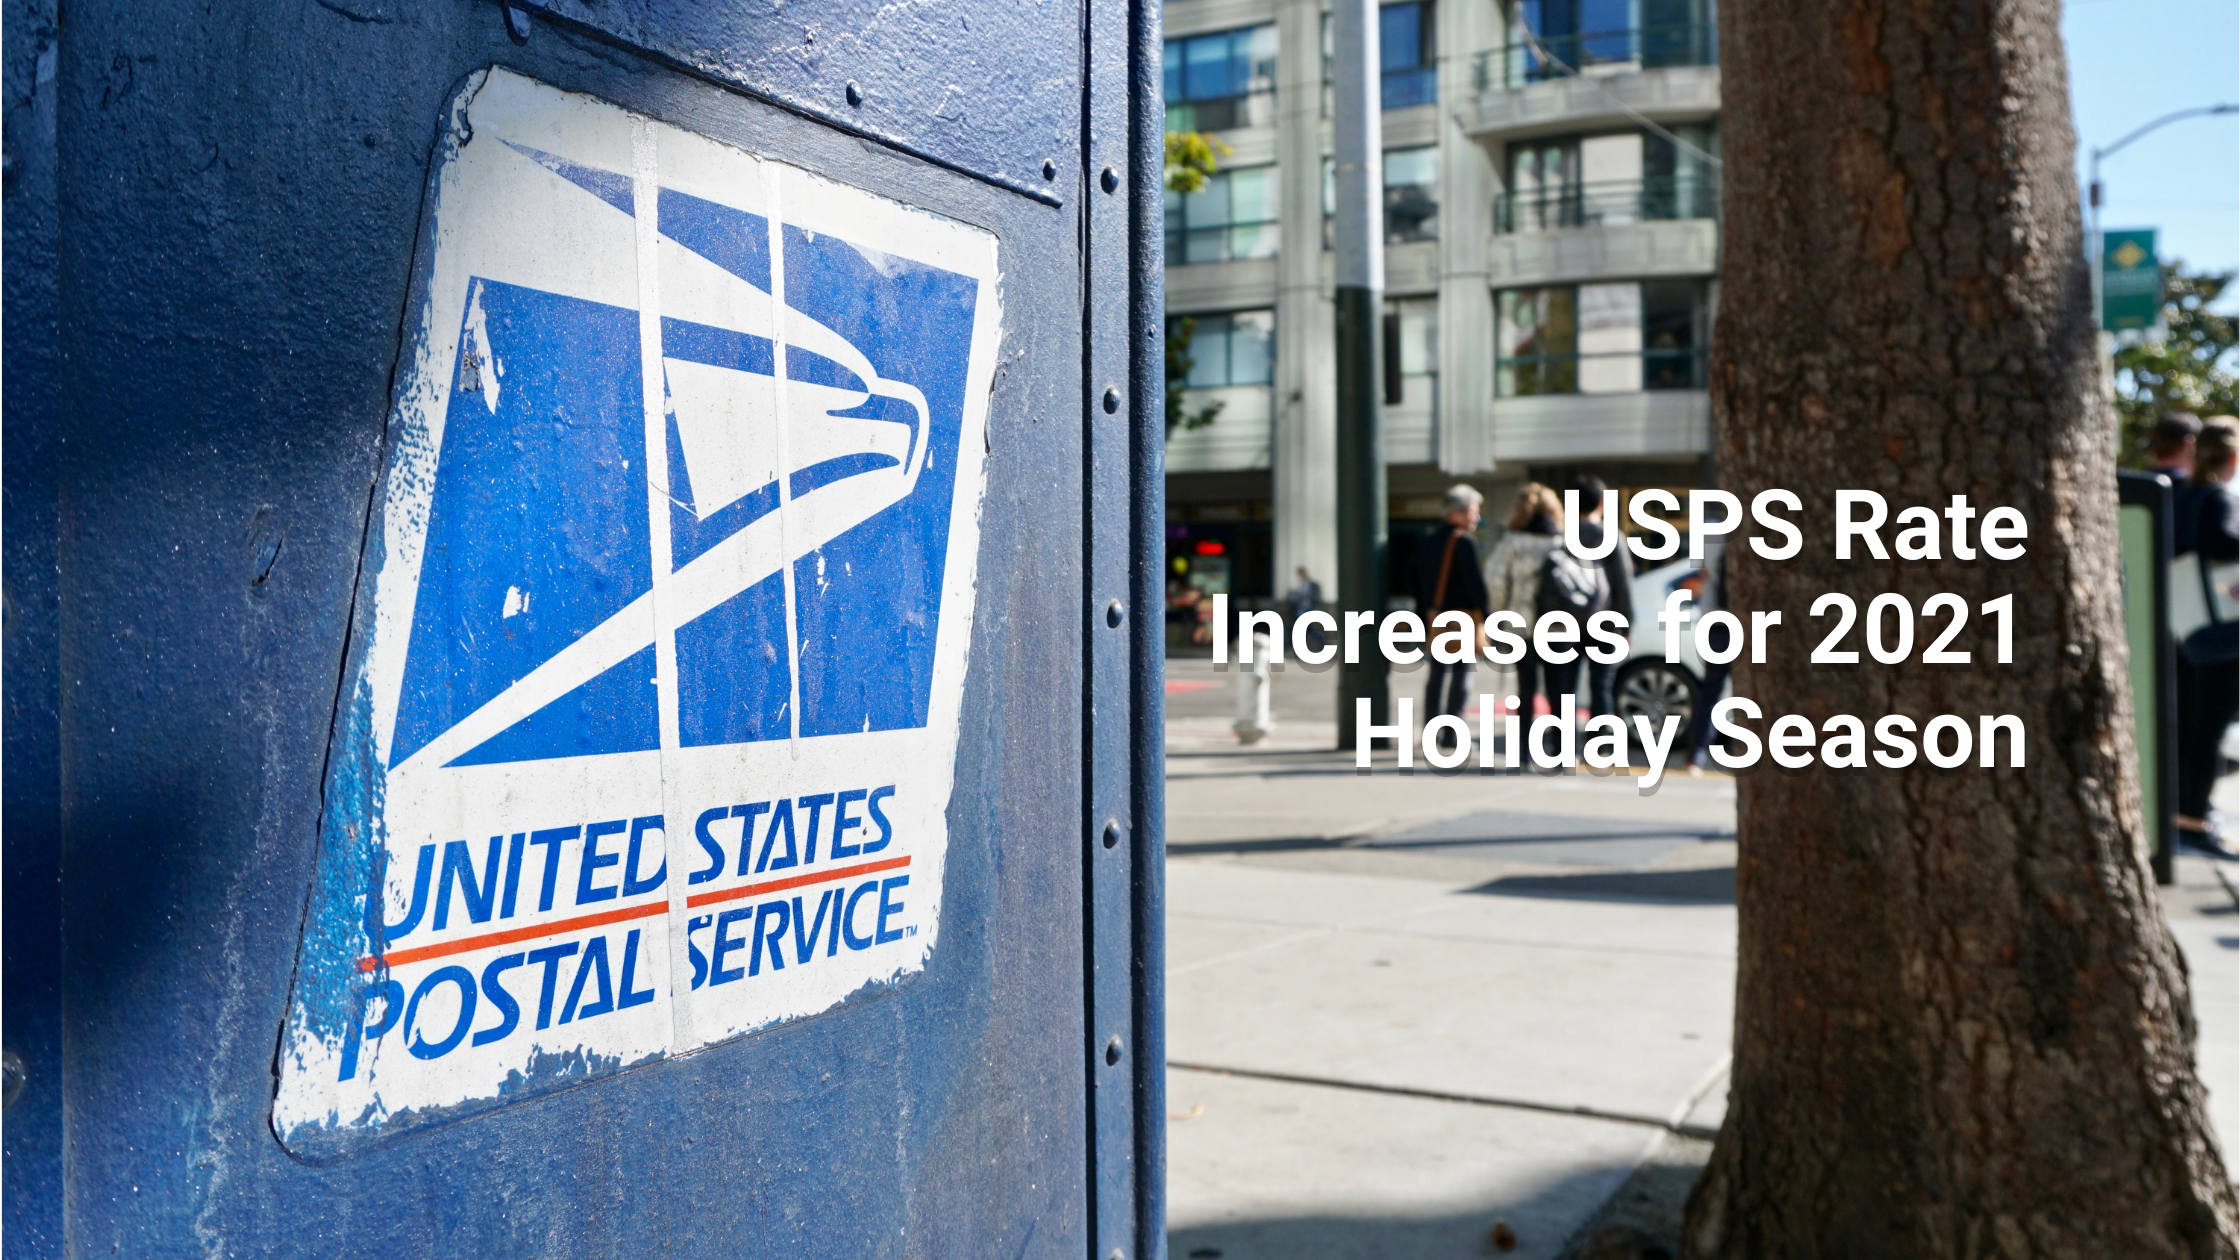 USPS Rate Increases for 2021 Holiday Season